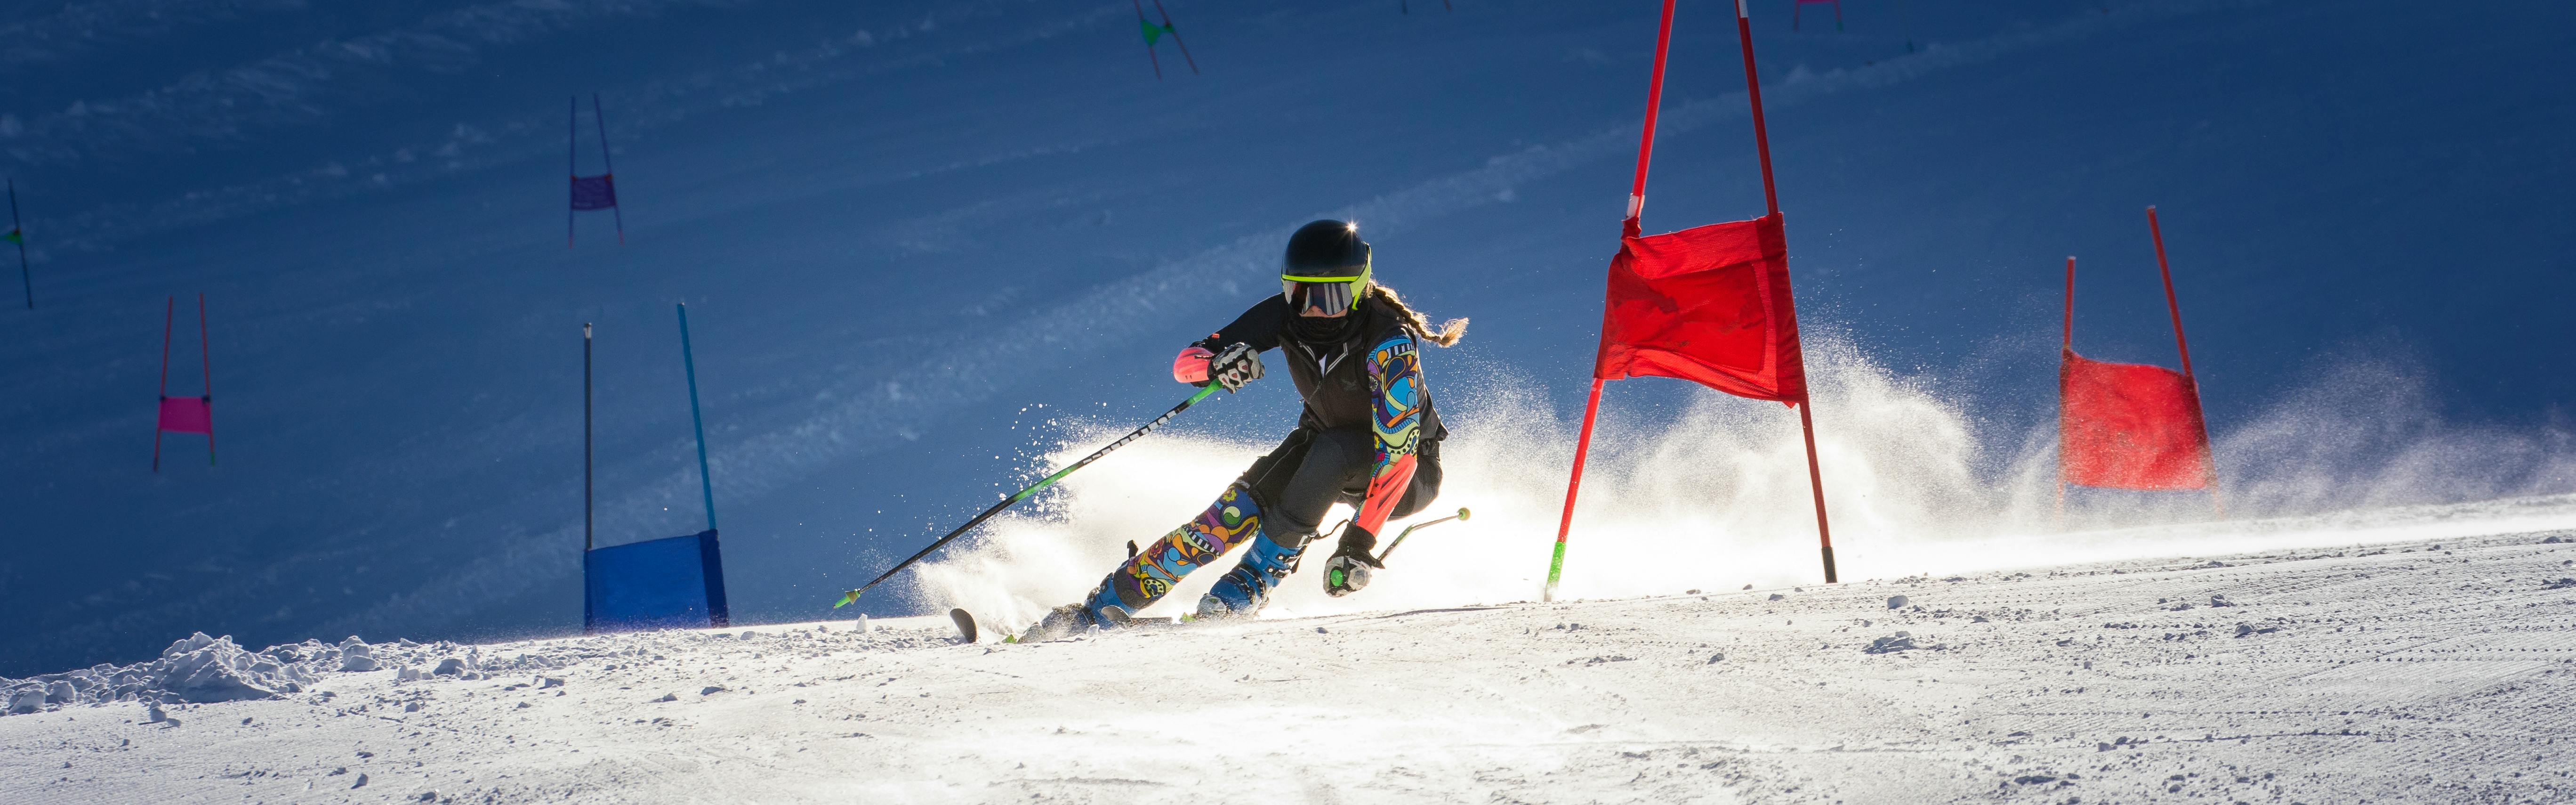 The Best Ski Boots for Racing